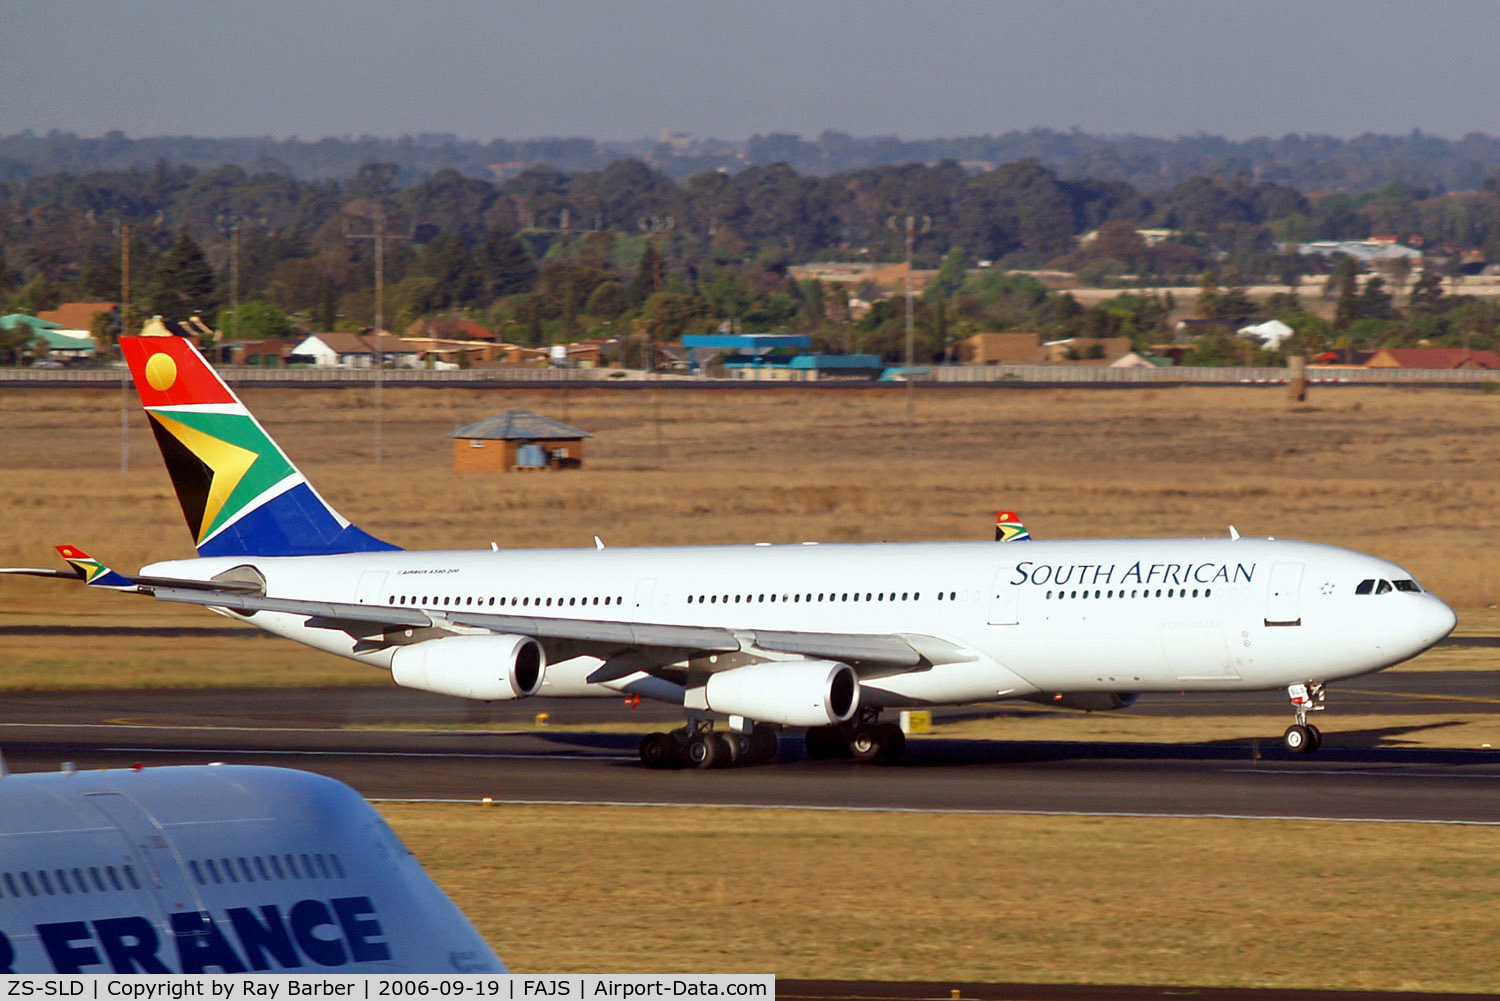 ZS-SLD, 1993 Airbus A340-211 C/N 019, Airbus A340-212 [019] (South African Airways) Johannesburg Int~ZS 19/09/2006. Taken through the glass of the terminal.